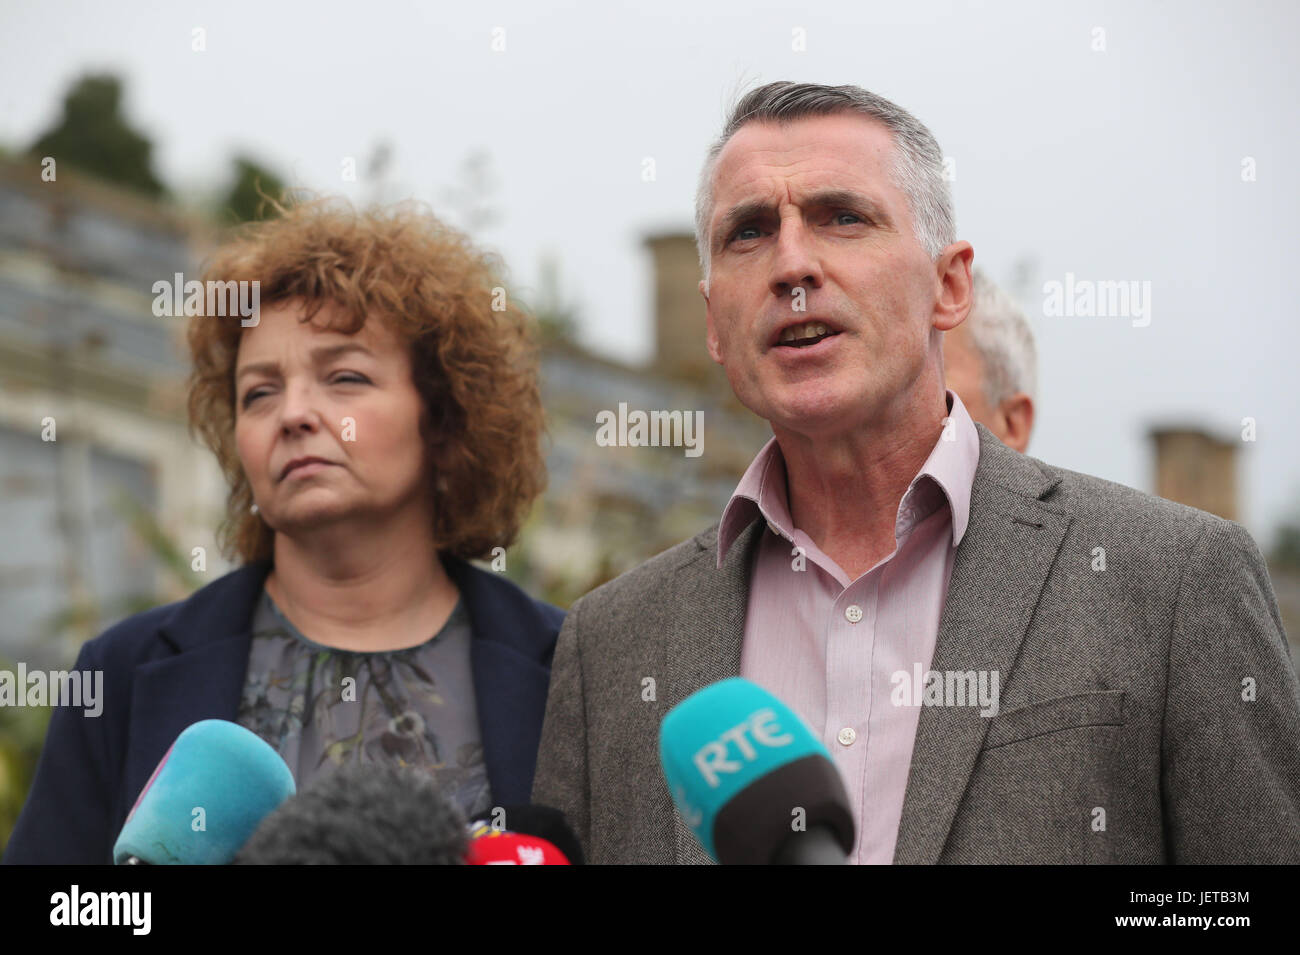 Sinn Fein's Caral Ni Chuilin (left) and Declan Kearney speak to the media outside Stormont castle as round-table all-party talks aimed at resurrecting political powersharing continues. Stock Photo